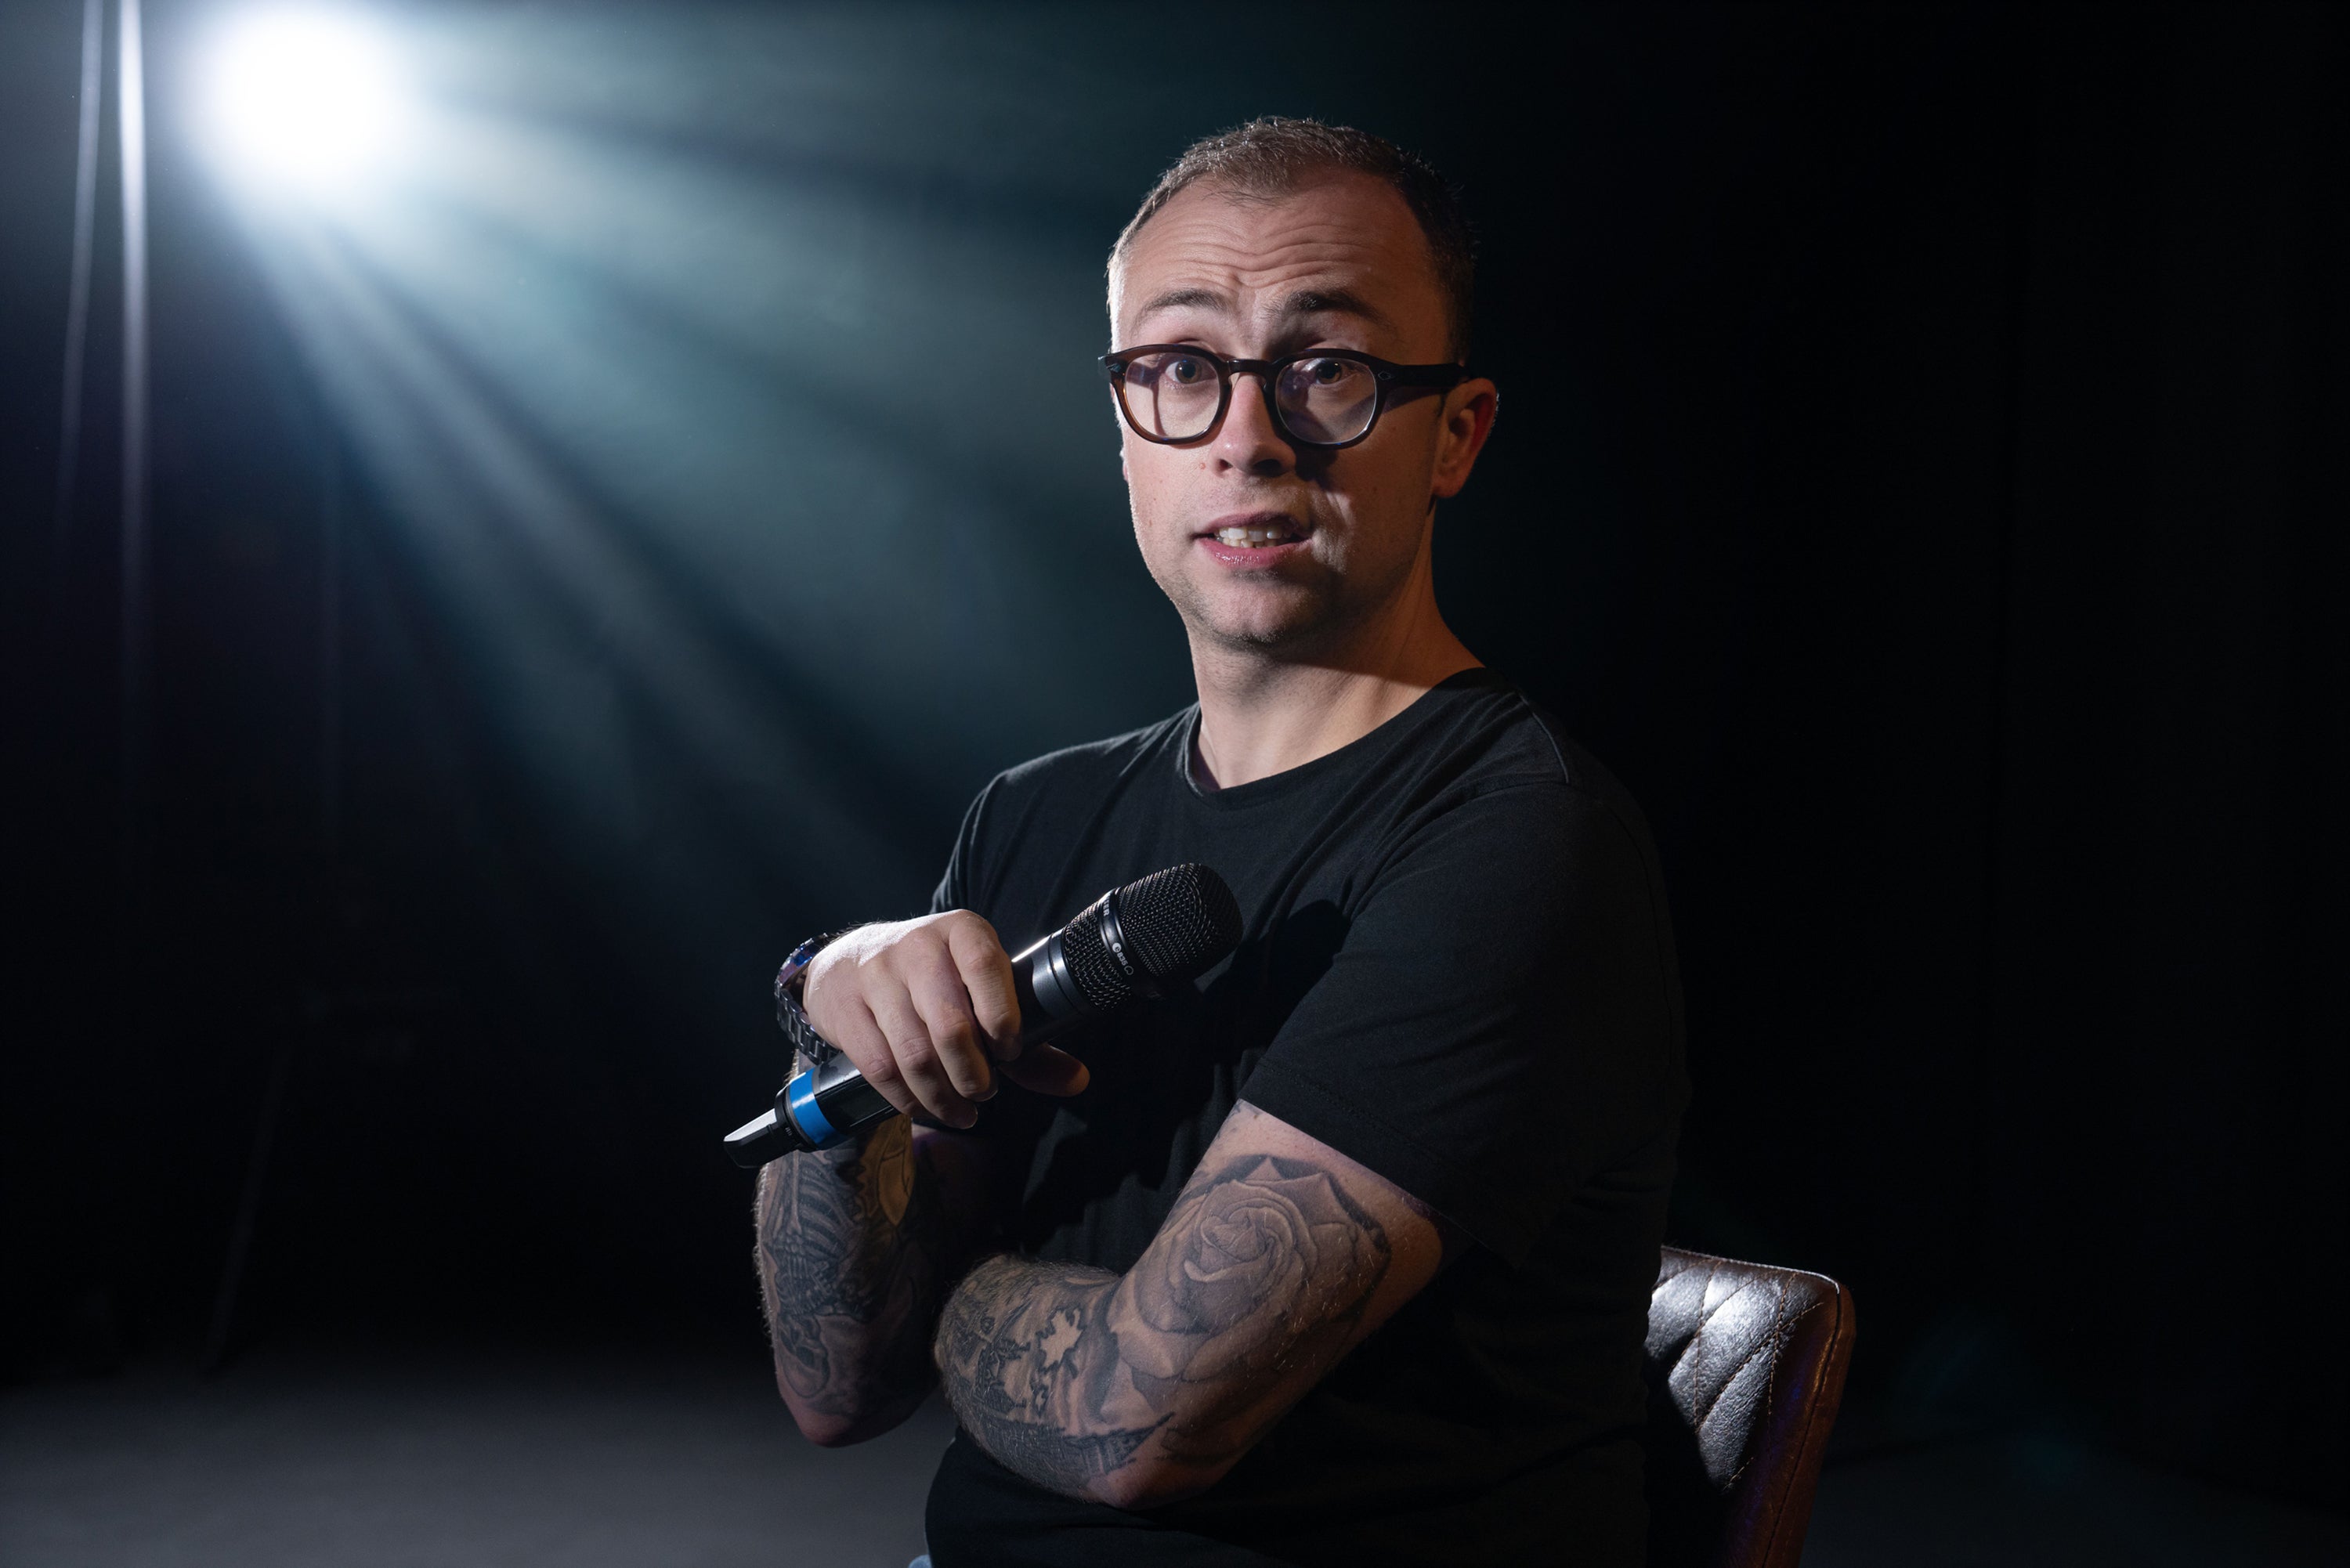 In his new documentary, Me and the Voice in My Head, Joe Tracini discusses common misconceptions about the illness